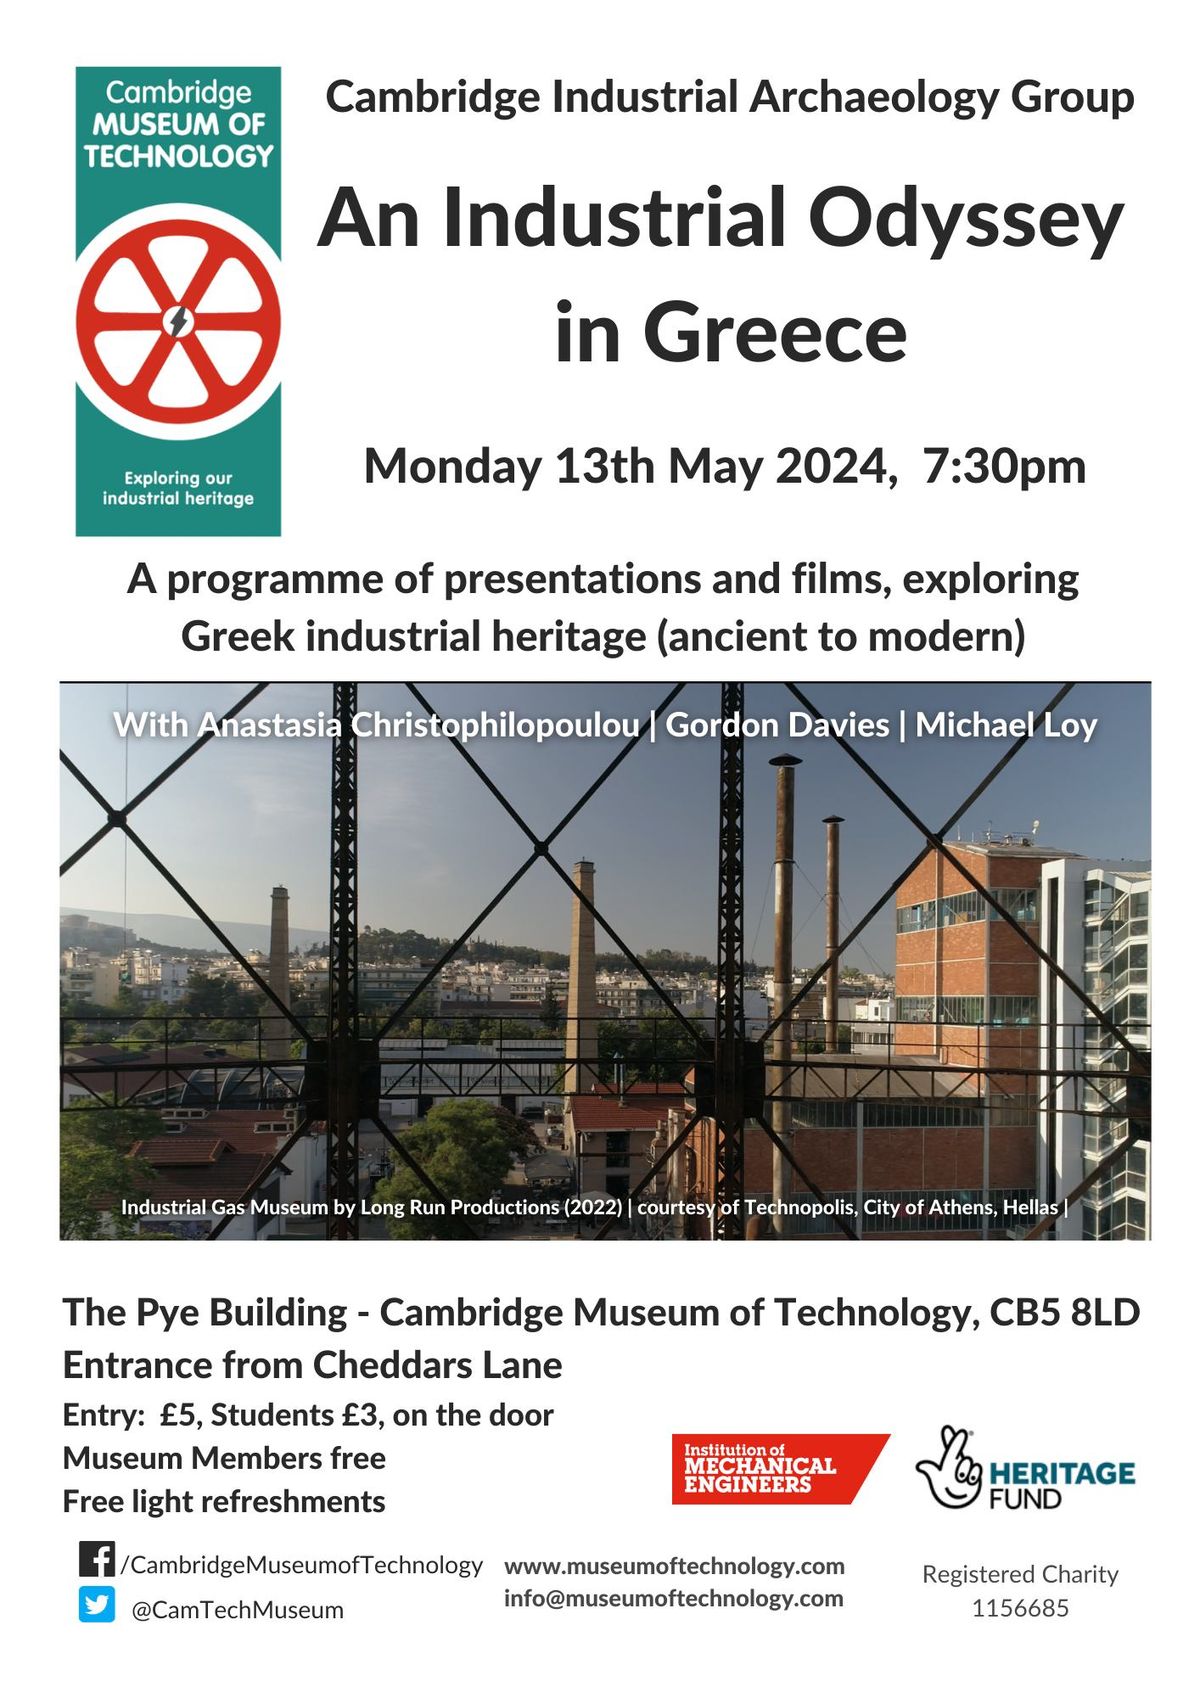 Cambridge Industrial Archaeology Group: Industrial Odyssey in Greece